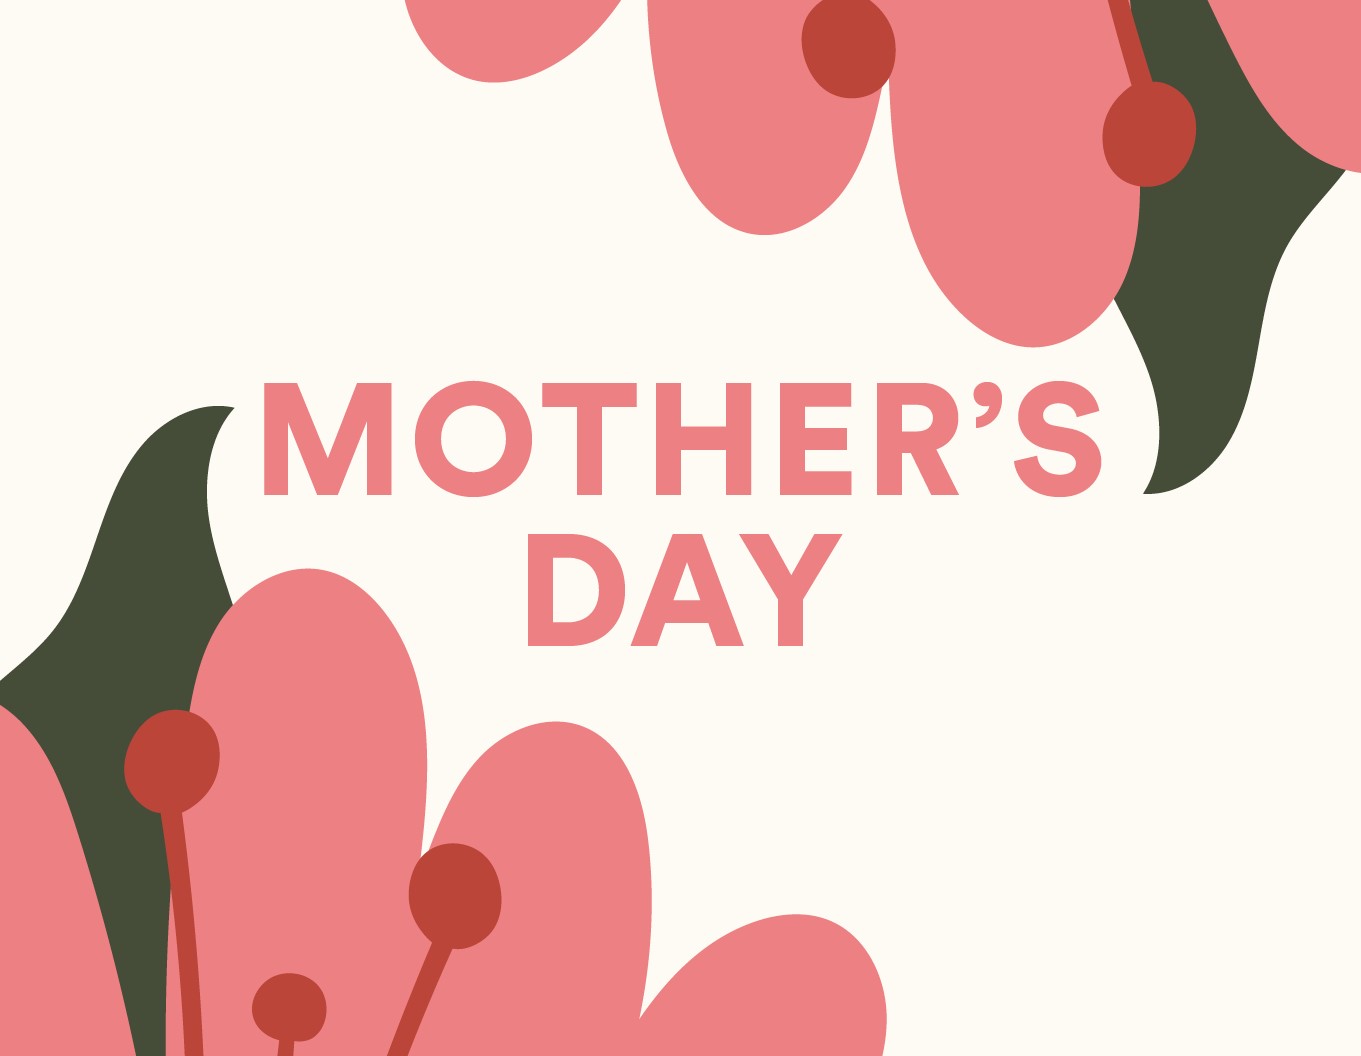 Mother’s Day: Sunday 12th May